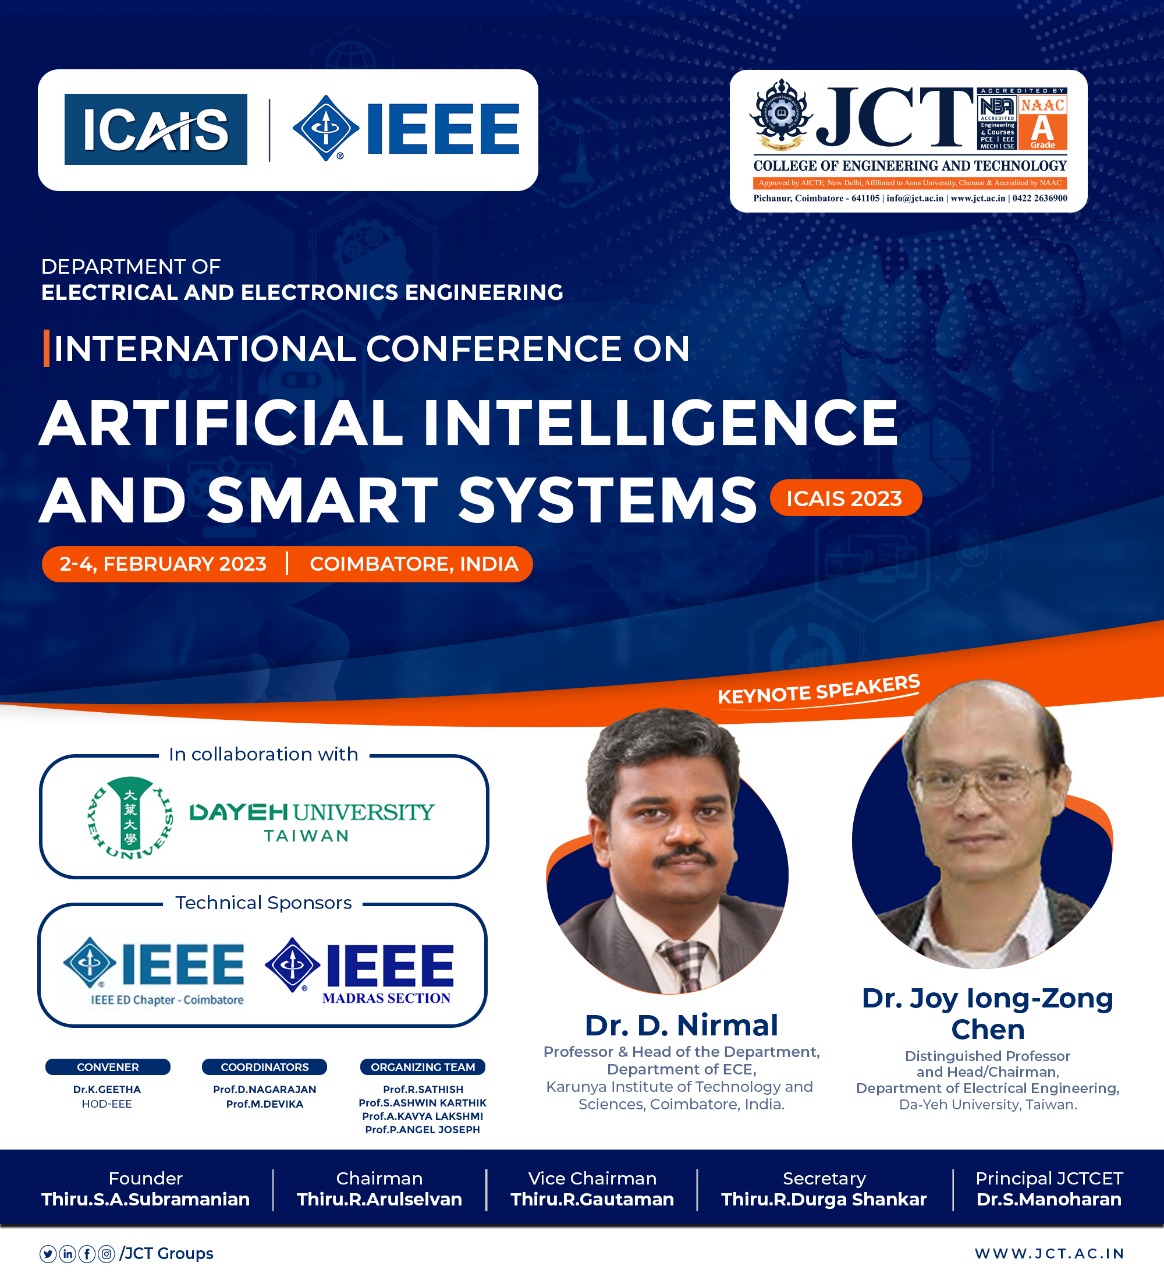 IEEE International conference on “Artificial Intelligence and Smart